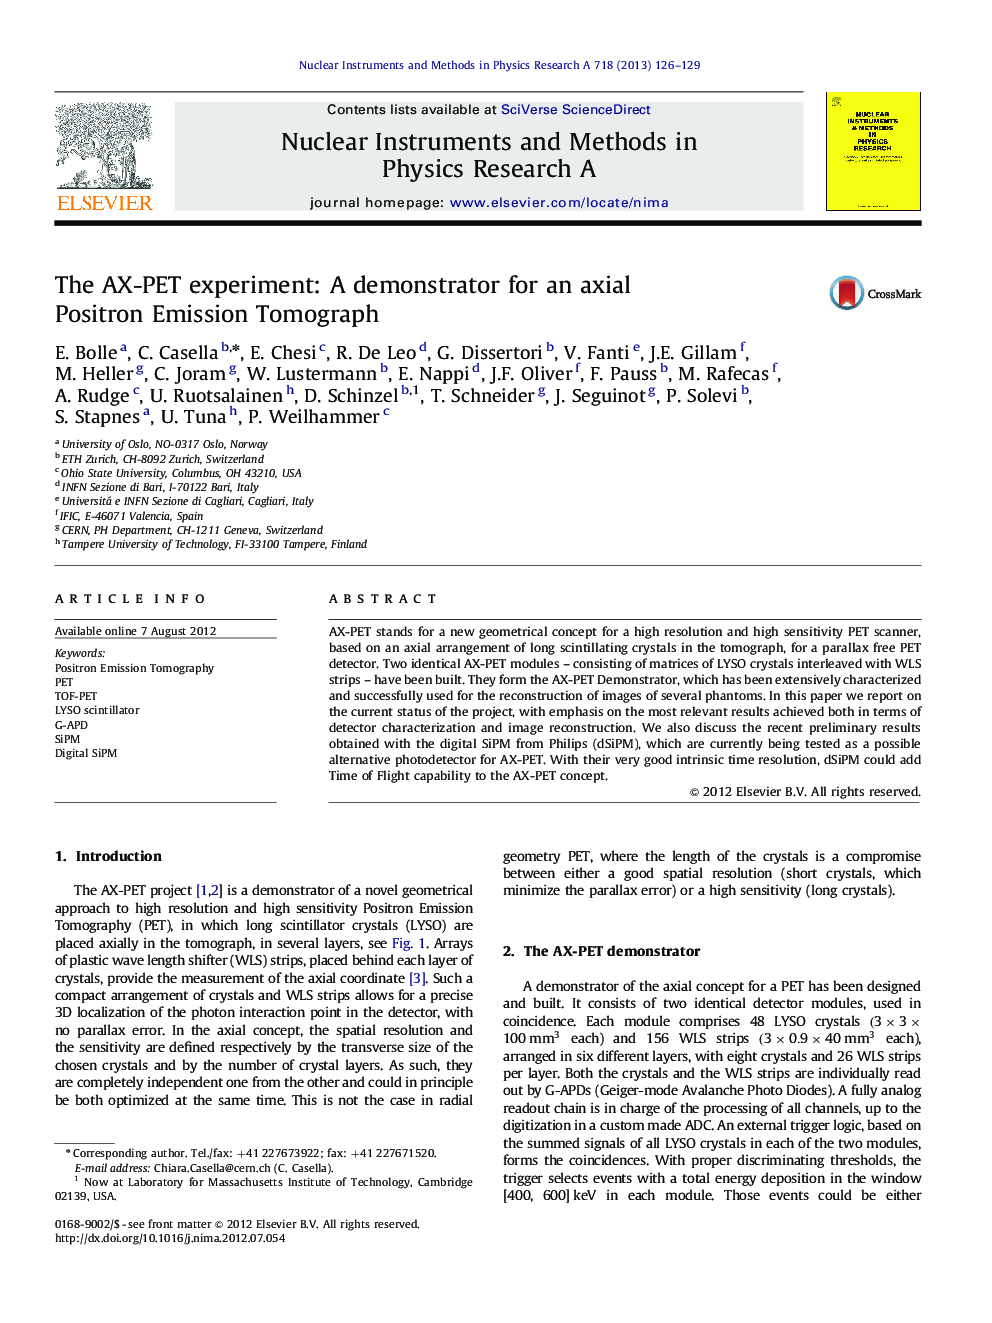 The AX-PET experiment: A demonstrator for an axial Positron Emission Tomograph